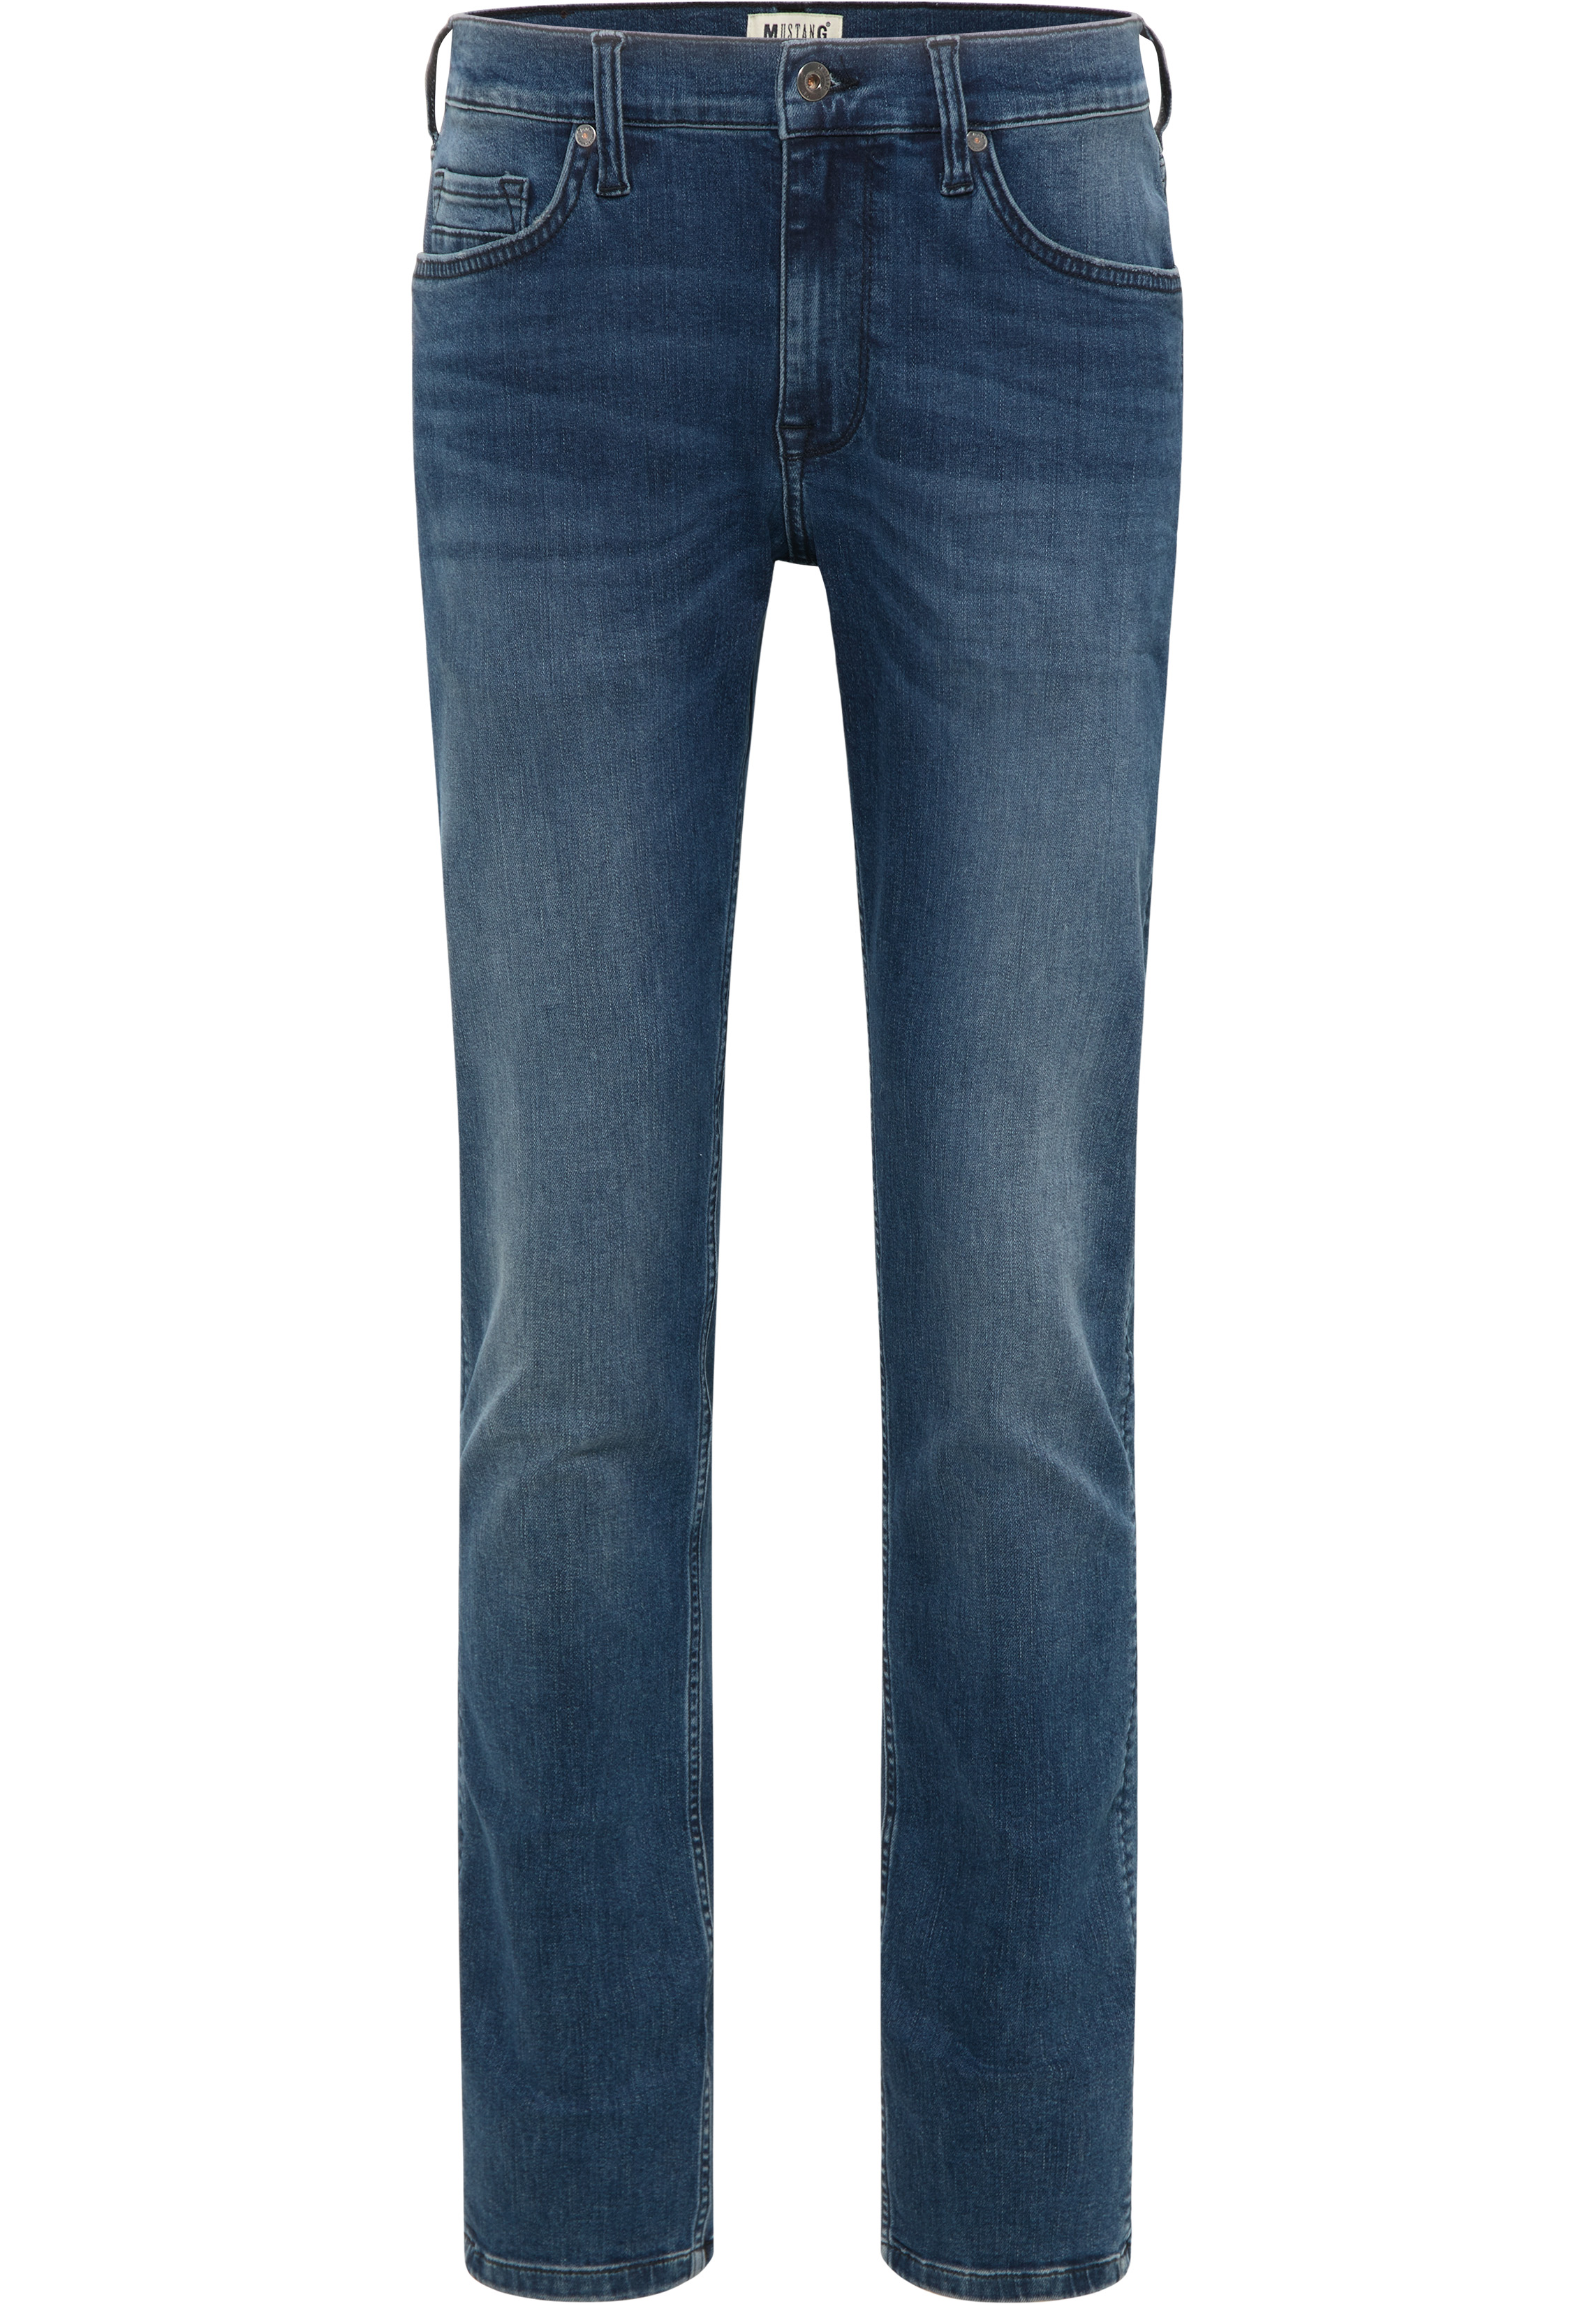 Mustang Jeans Vegas Stretch Slim Fit extra lang